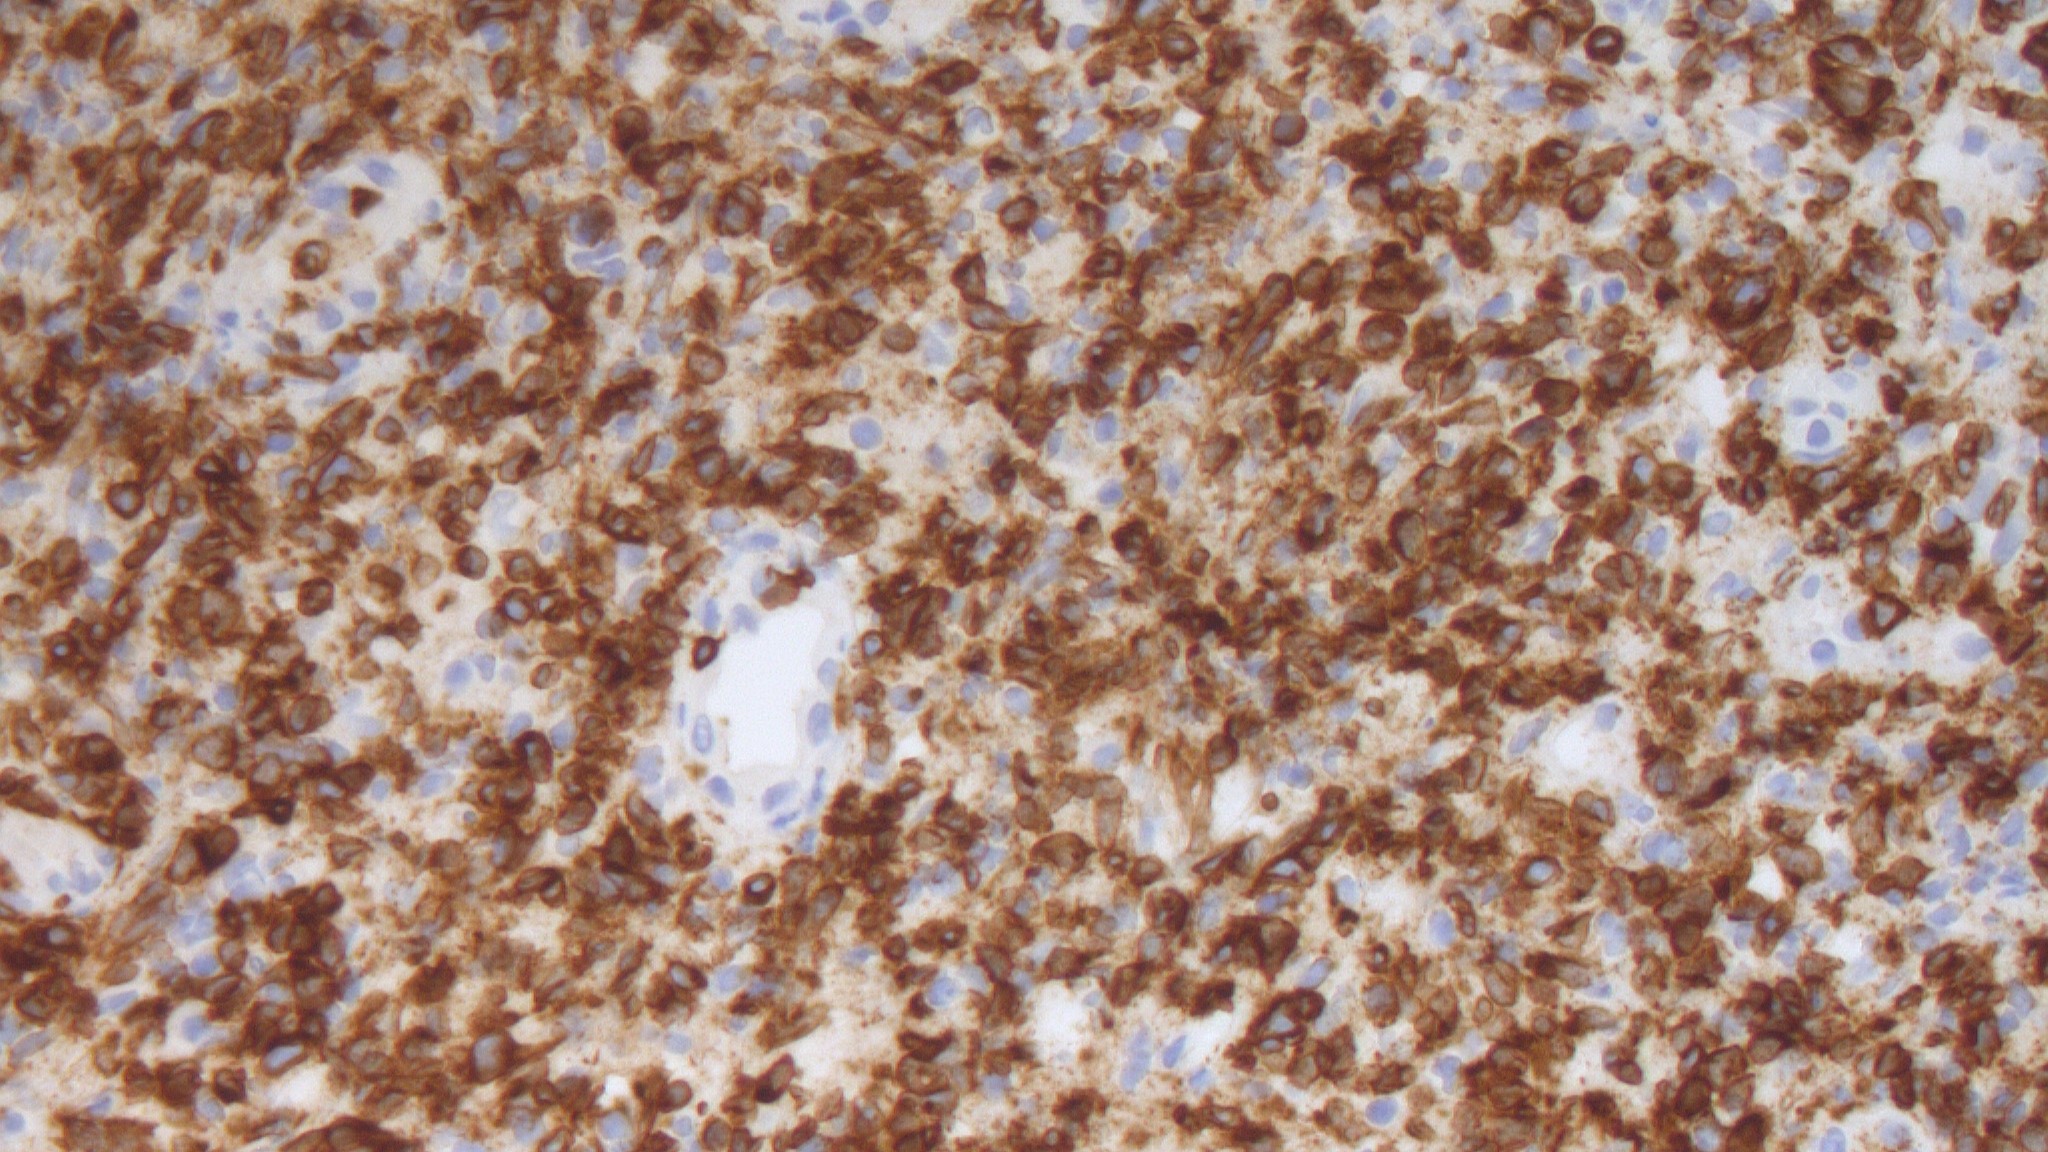 Expression of CD3 in extranodal NK T cell lymphoma